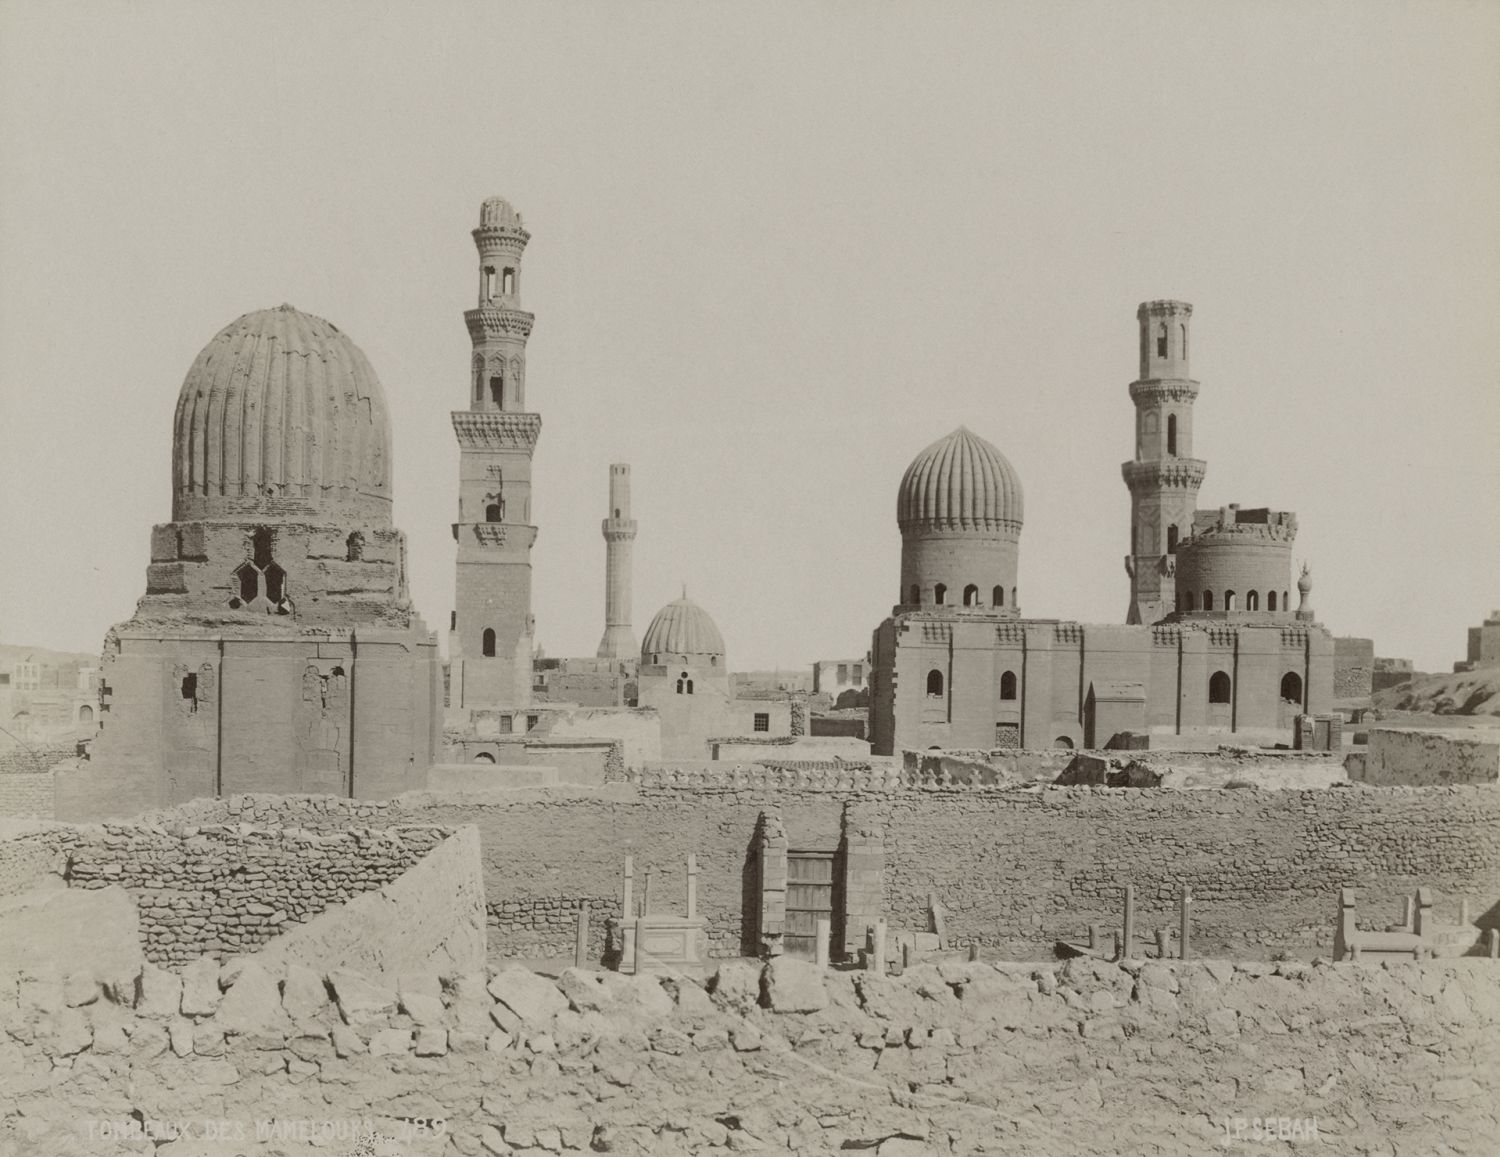 View of monuments in Cairo's Southern Cemetery: Tomb of Qawsun (front left), Sultaniyya Complex (middle right), and Nur al-Din Mosque (back center).